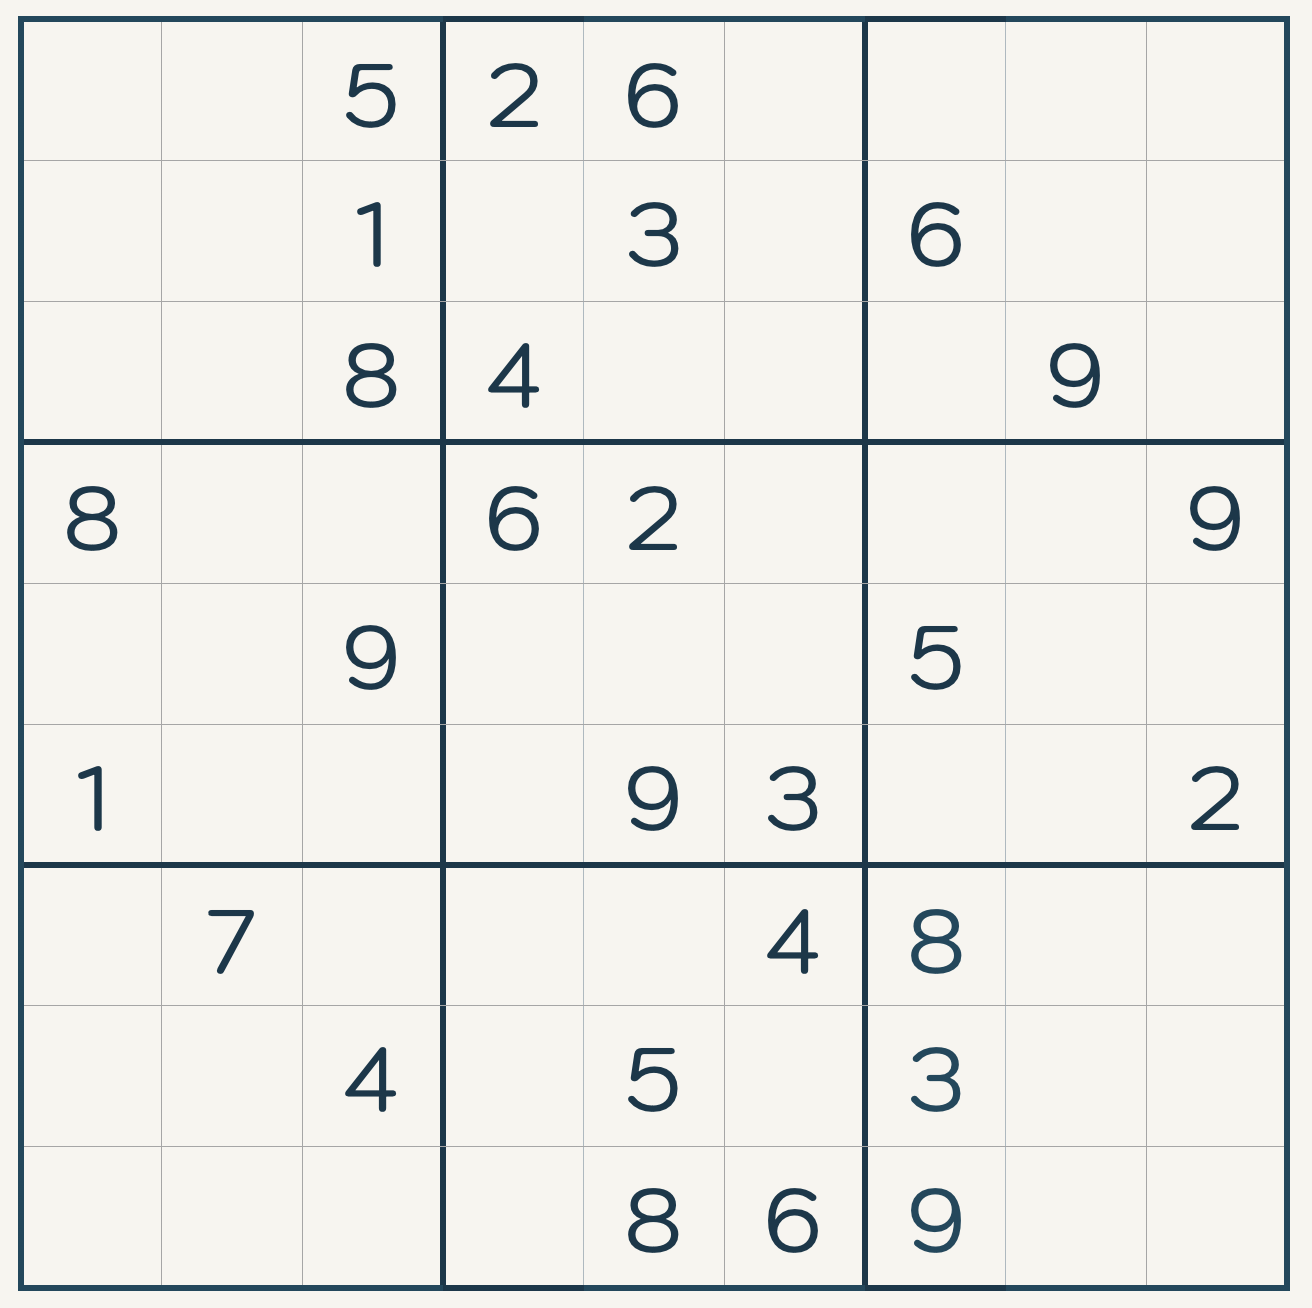 example of a sudoku grid with single candidates - tip